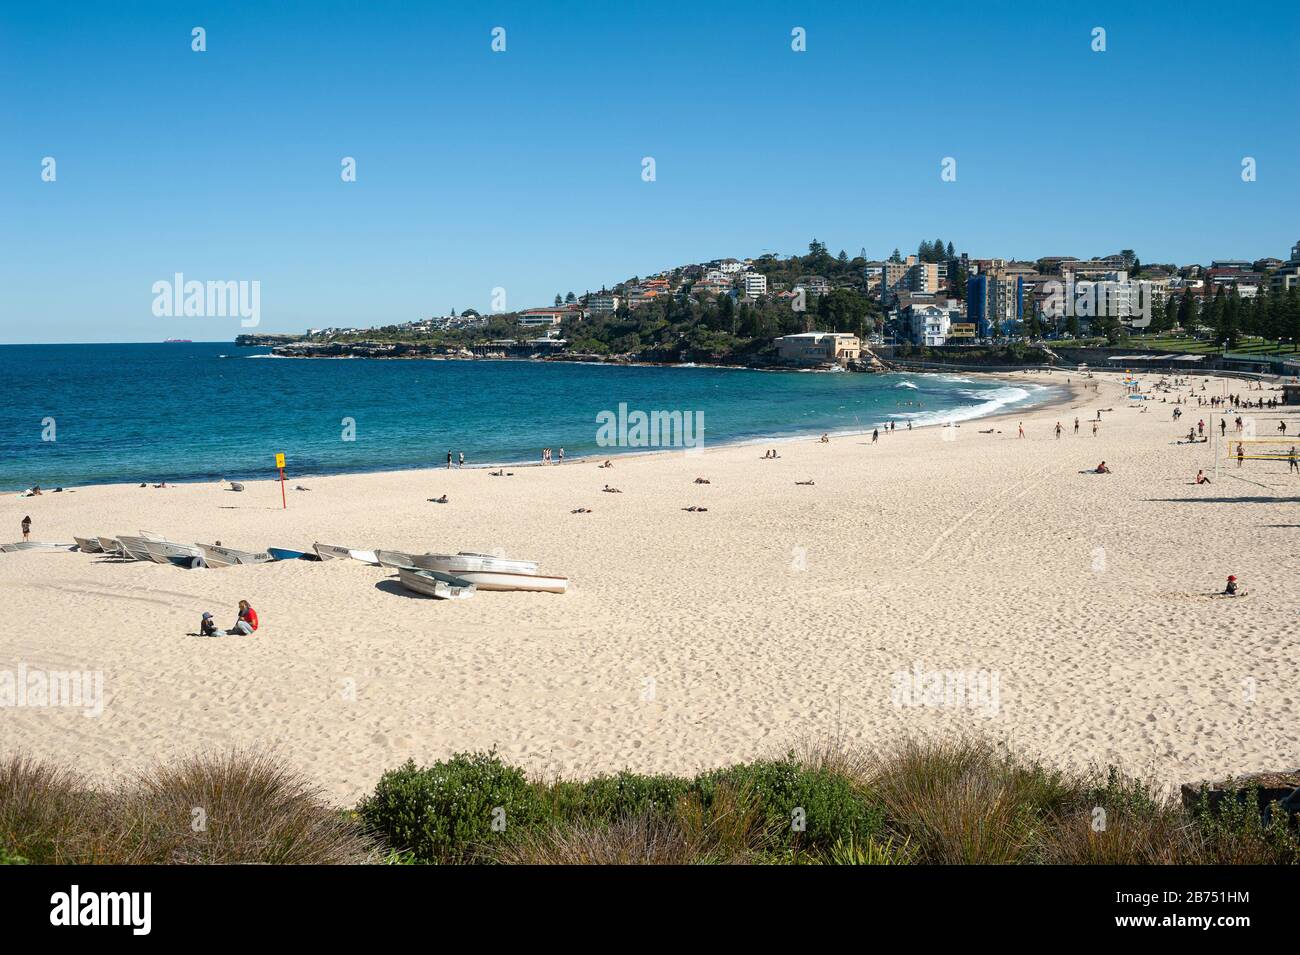 24.09.2019, Sydney, New South Wales, Australia - People on the sand under a bright blue sky at Coogee Beach with buildings in the background. [automated translation] Stock Photo